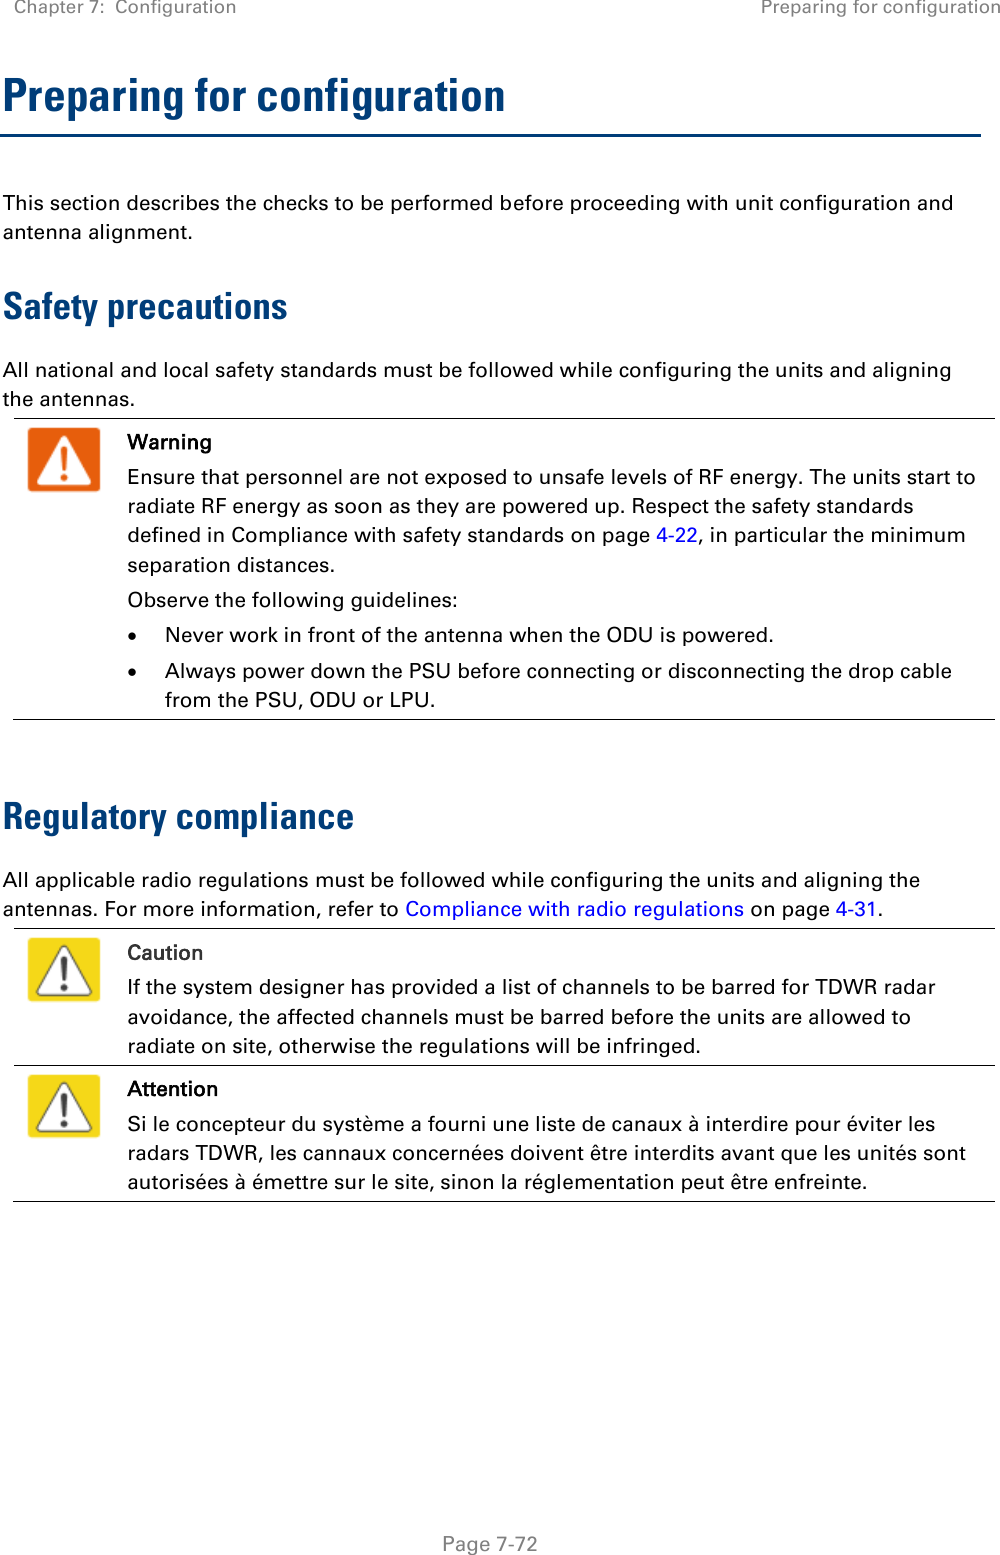 Chapter 7:  Configuration Preparing for configuration   Page 7-72 Preparing for configuration This section describes the checks to be performed before proceeding with unit configuration and antenna alignment. Safety precautions All national and local safety standards must be followed while configuring the units and aligning the antennas.   Warning Ensure that personnel are not exposed to unsafe levels of RF energy. The units start to radiate RF energy as soon as they are powered up. Respect the safety standards defined in Compliance with safety standards on page 4-22, in particular the minimum separation distances. Observe the following guidelines:  Never work in front of the antenna when the ODU is powered.  Always power down the PSU before connecting or disconnecting the drop cable from the PSU, ODU or LPU.  Regulatory compliance All applicable radio regulations must be followed while configuring the units and aligning the antennas. For more information, refer to Compliance with radio regulations on page 4-31.   Caution If the system designer has provided a list of channels to be barred for TDWR radar avoidance, the affected channels must be barred before the units are allowed to radiate on site, otherwise the regulations will be infringed.   Attention Si le concepteur du système a fourni une liste de canaux à interdire pour éviter les radars TDWR, les cannaux concernées doivent être interdits avant que les unités sont autorisées à émettre sur le site, sinon la réglementation peut être enfreinte.  